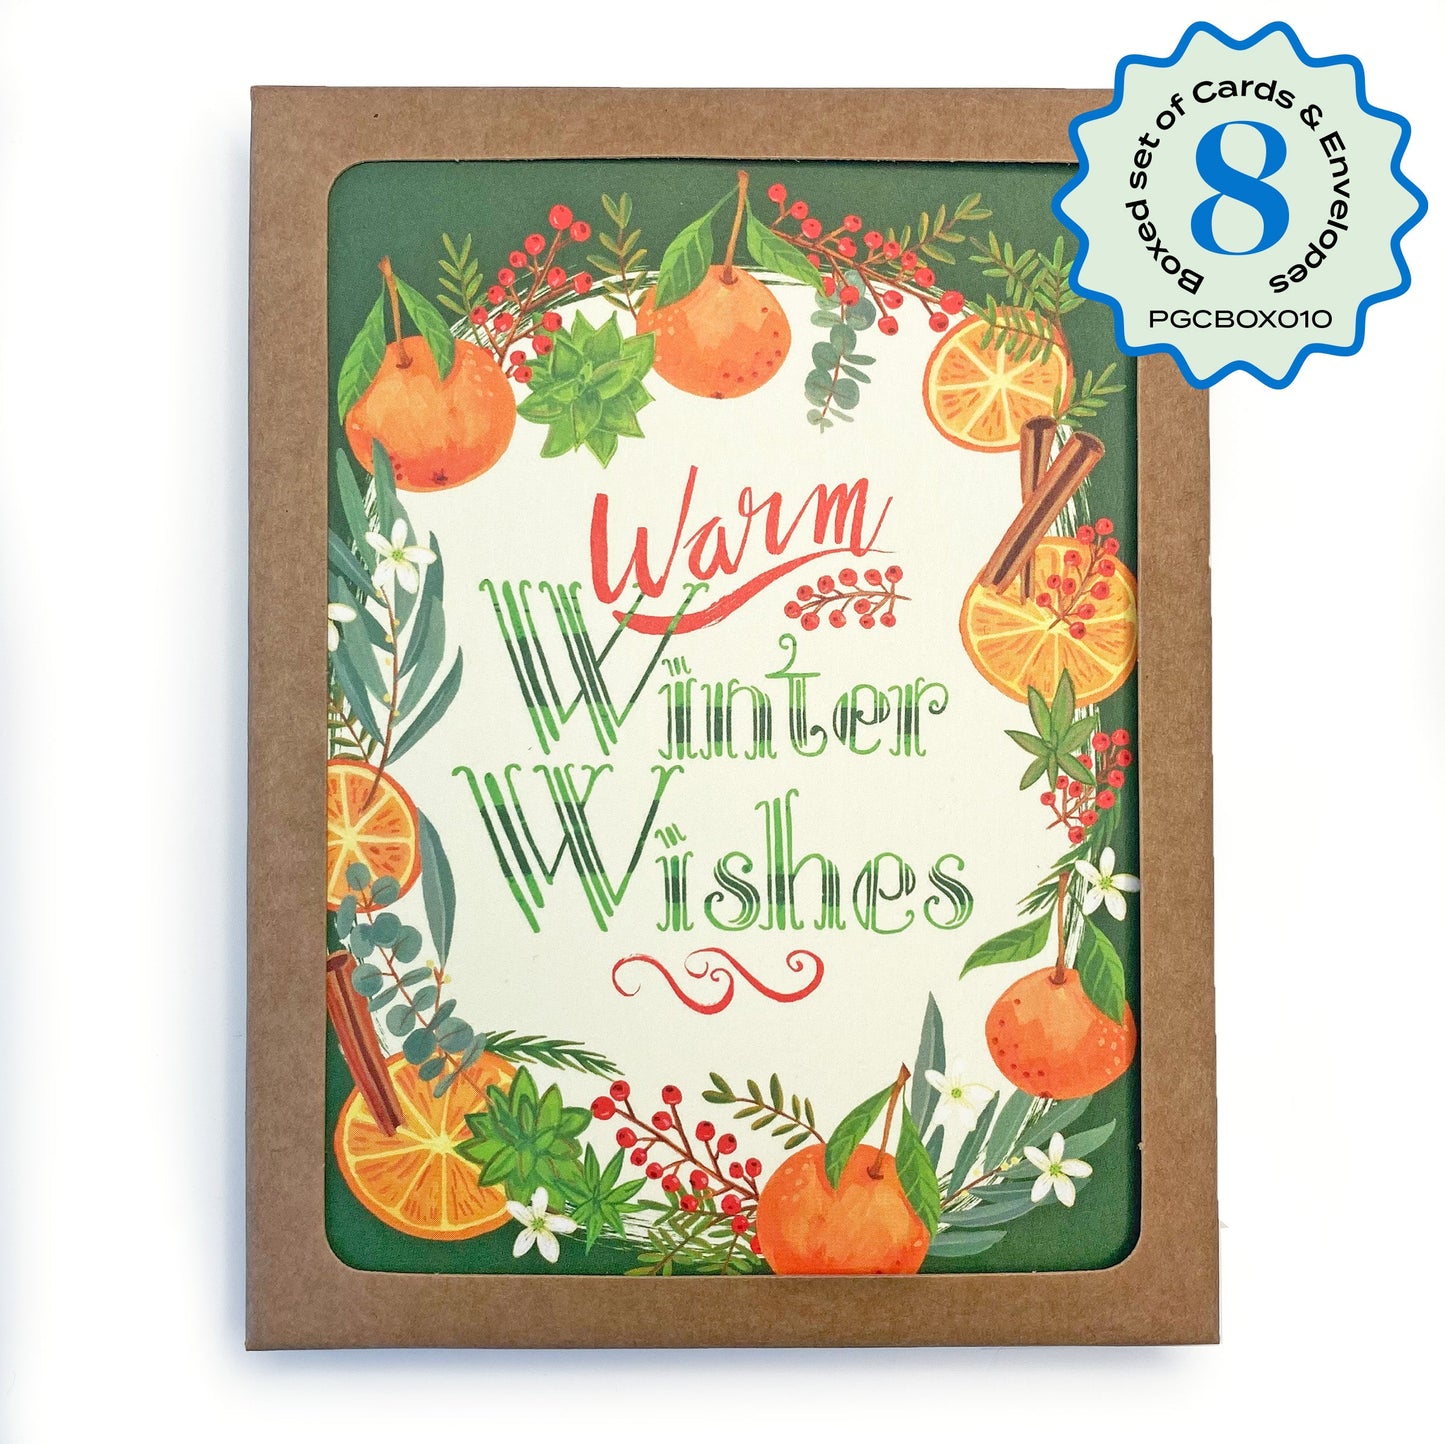 Boxed Set of 8 Cards-Warm Winter Wishes Greeting Cards-Wholesale